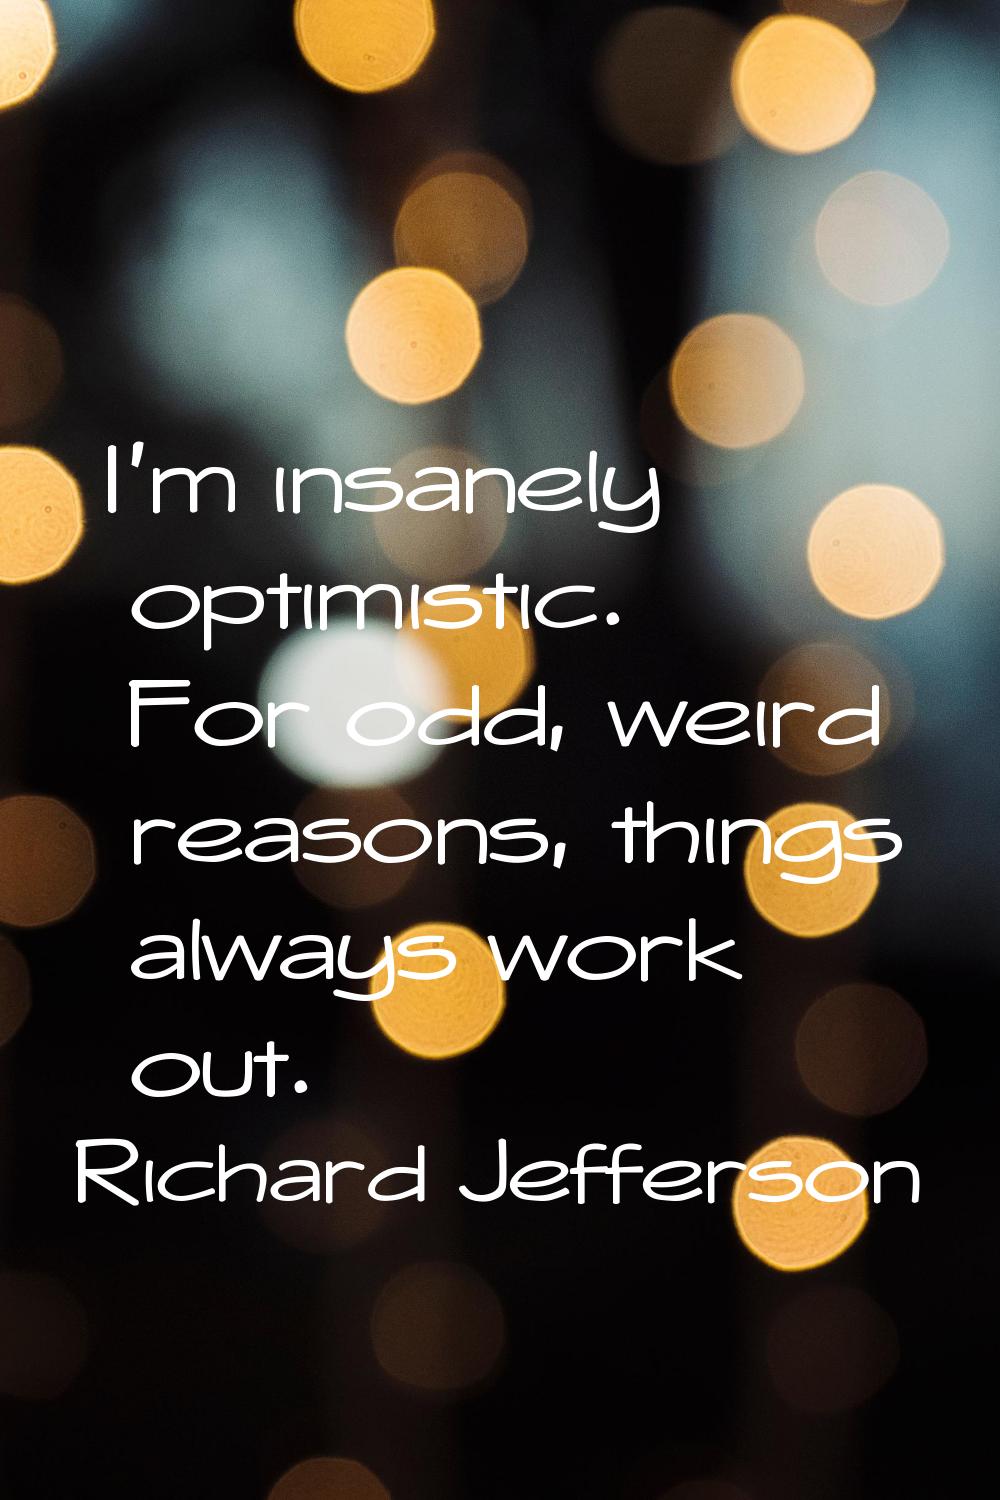 I'm insanely optimistic. For odd, weird reasons, things always work out.